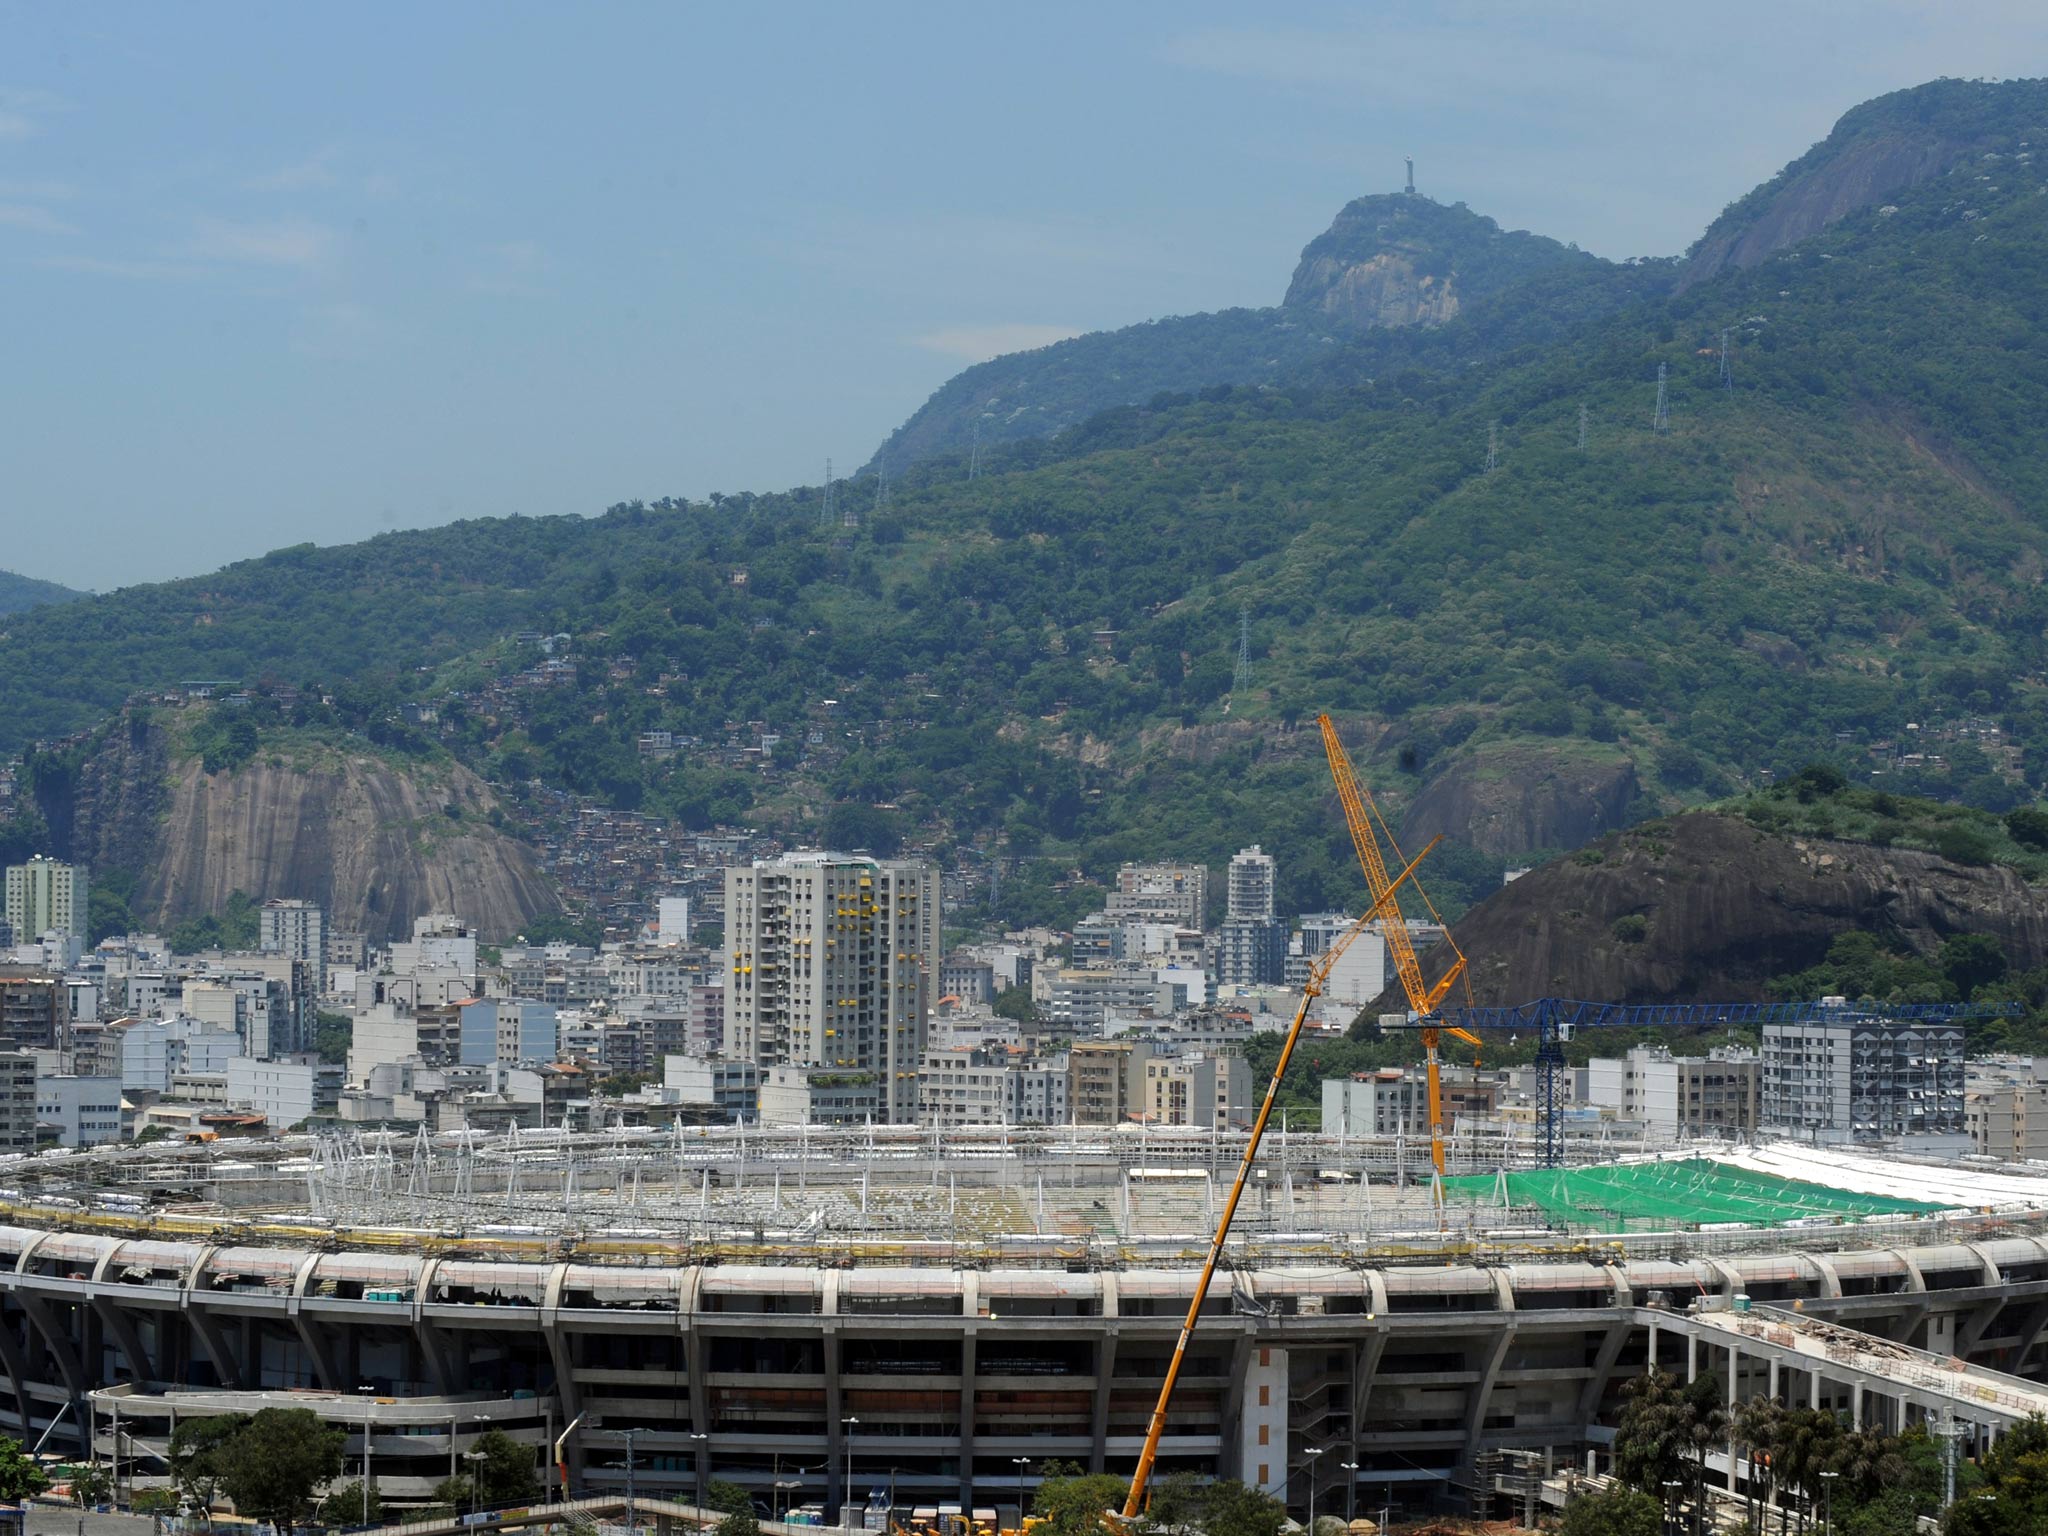 A view of the Maracana in Rio